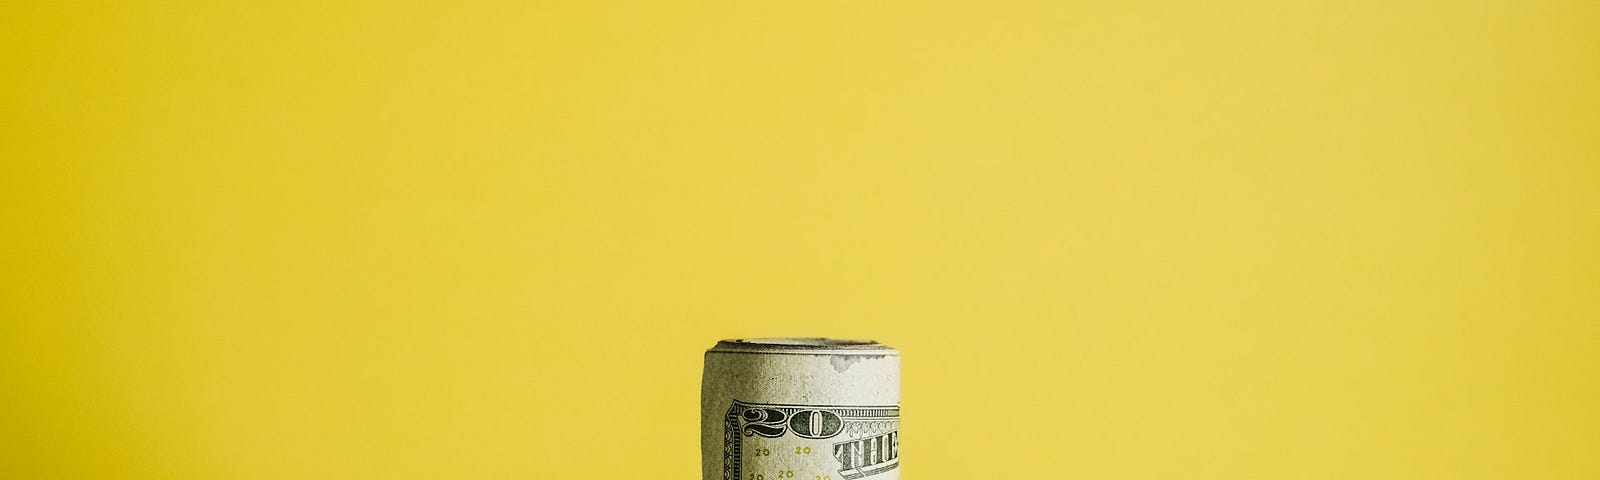 A roll of American money on a yellow background.